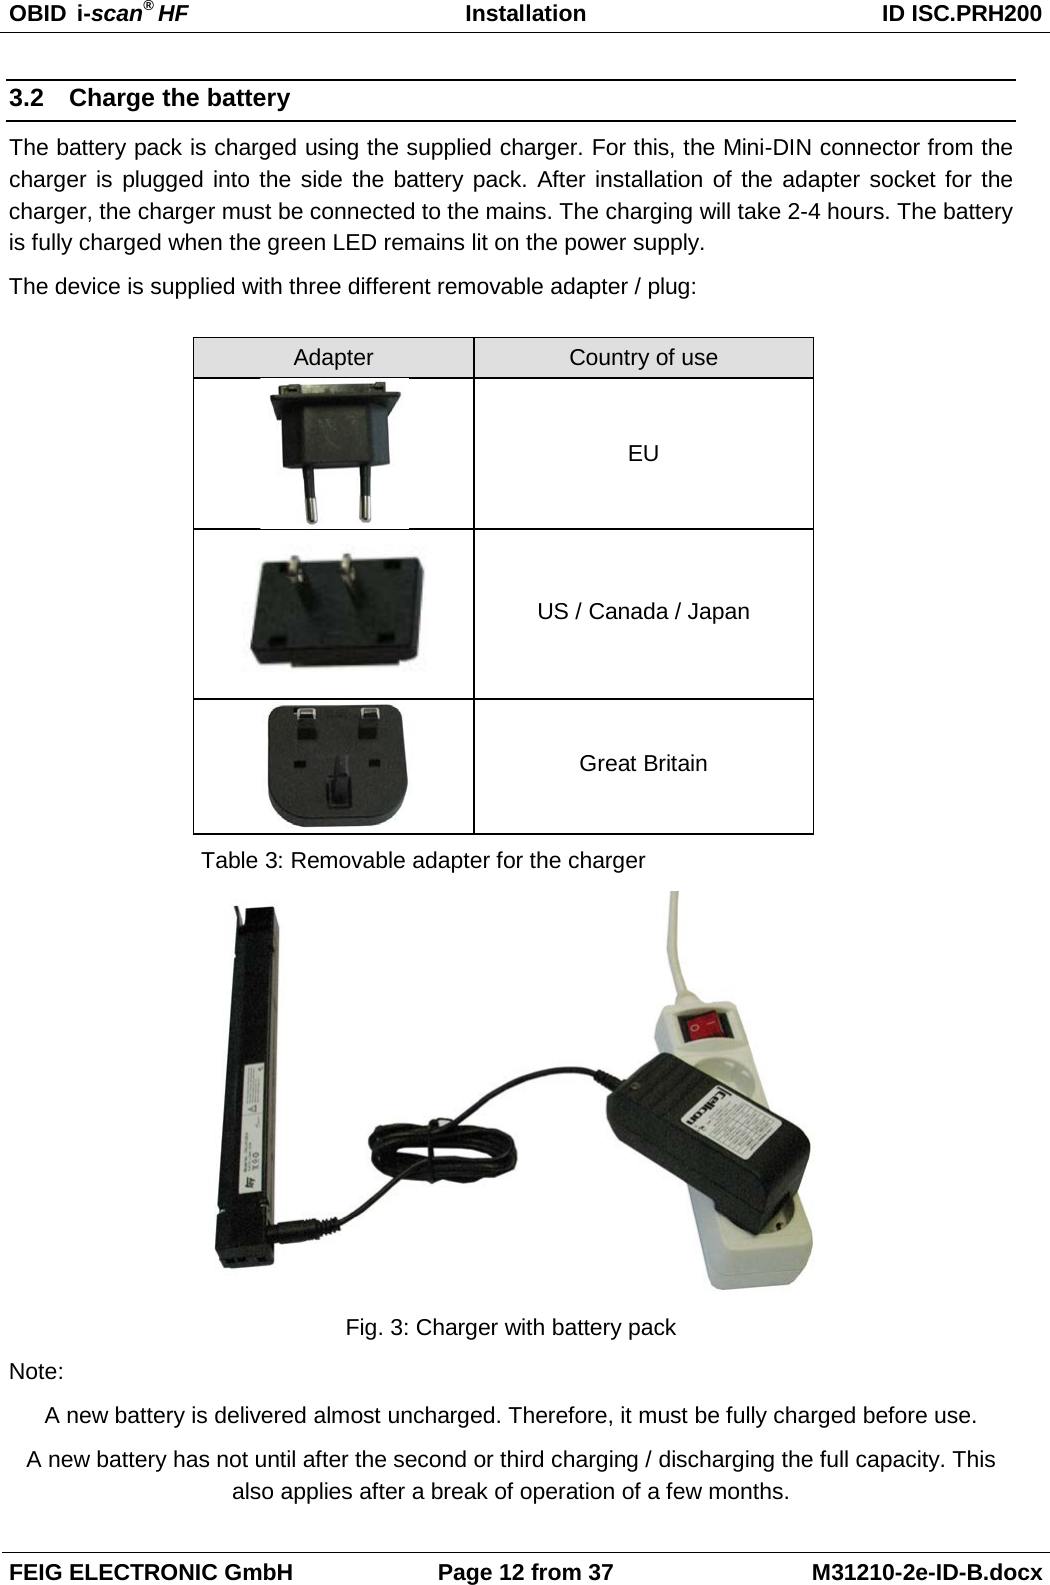 OBID  i-scan® HF Installation ID ISC.PRH200  FEIG ELECTRONIC GmbH Page 12 from 37 M31210-2e-ID-B.docx  3.2 Charge the battery The battery pack is charged using the supplied charger. For this, the Mini-DIN connector from the charger is plugged into the side the battery pack. After installation of the adapter socket for the charger, the charger must be connected to the mains. The charging will take 2-4 hours. The battery is fully charged when the green LED remains lit on the power supply. The device is supplied with three different removable adapter / plug:   Adapter  Country of use  EU  US / Canada / Japan  Great Britain Table 3: Removable adapter for the charger  Fig. 3: Charger with battery pack Note: A new battery is delivered almost uncharged. Therefore, it must be fully charged before use. A new battery has not until after the second or third charging / discharging the full capacity. This also applies after a break of operation of a few months. 